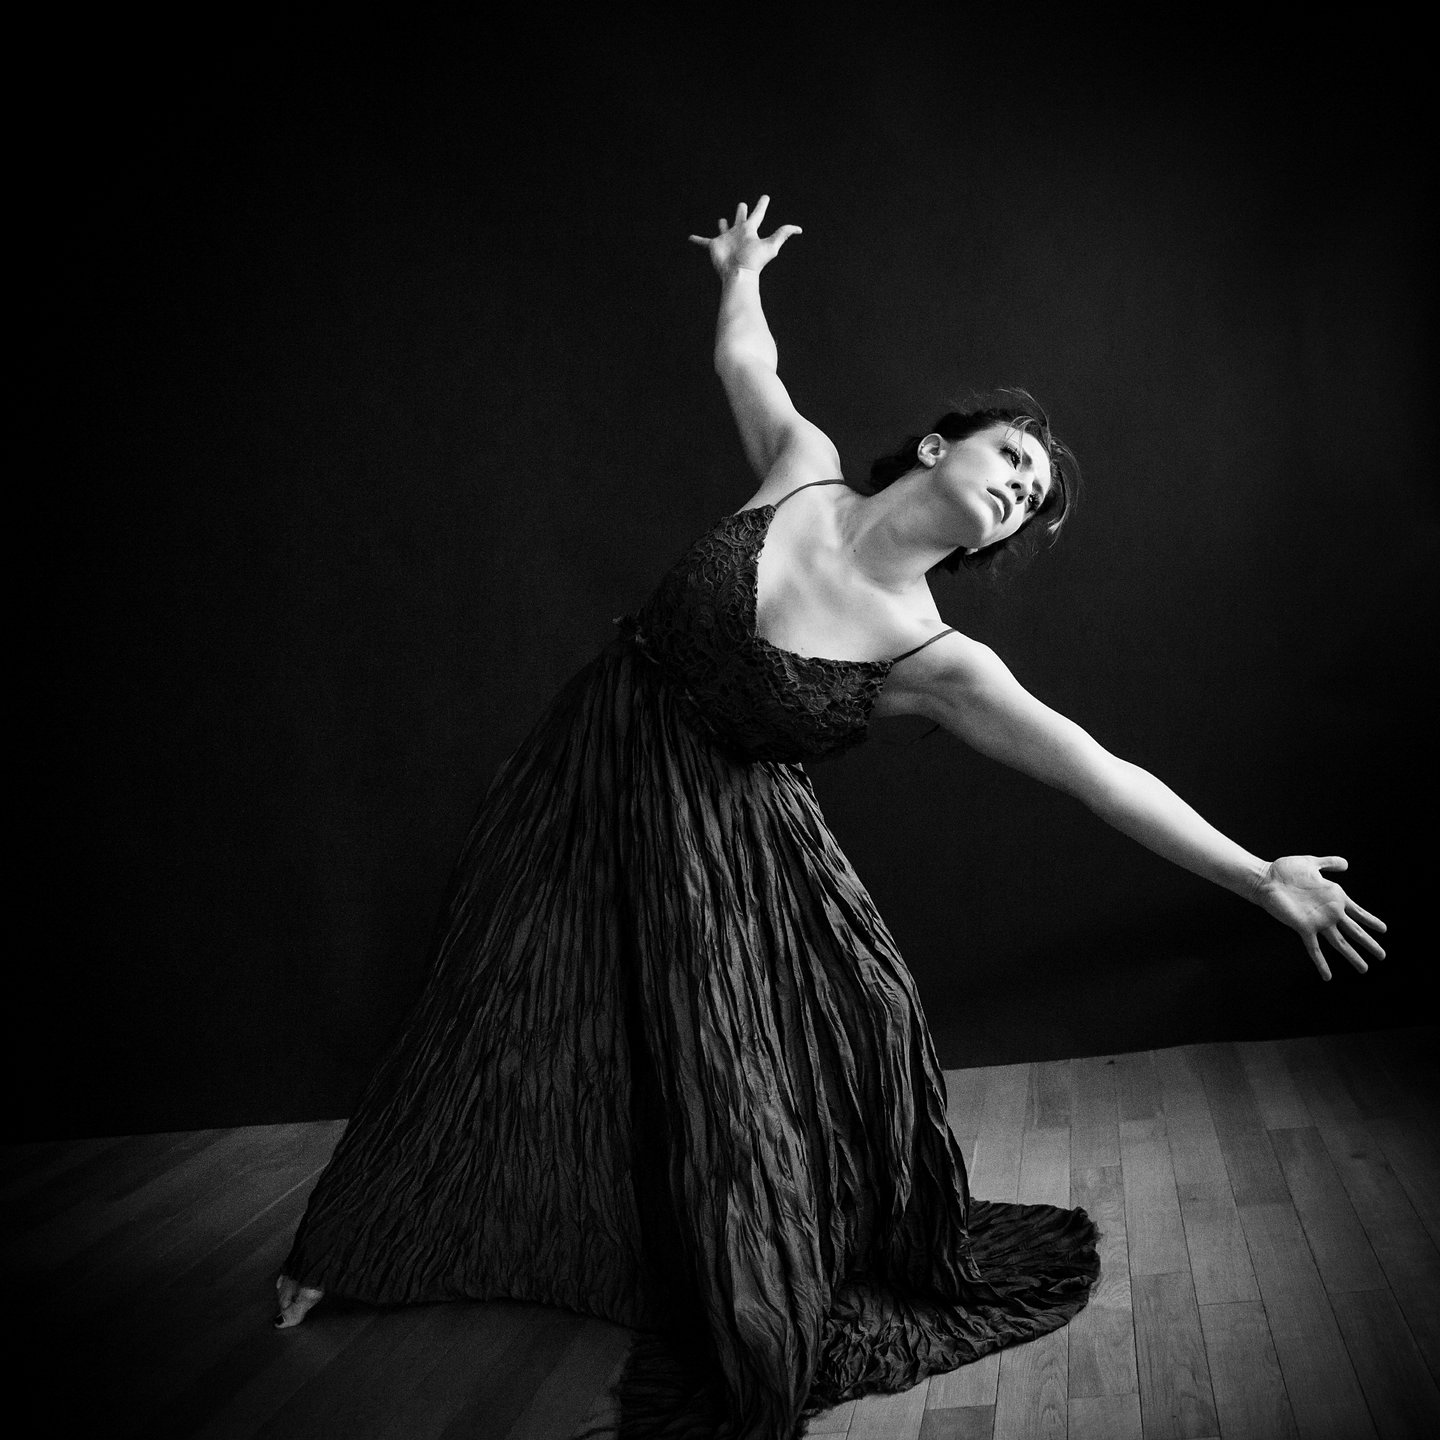 Los Angeles Dance Portrait Photo - Stephanie Abrams - by Tommy Xing Photography 18.jpg